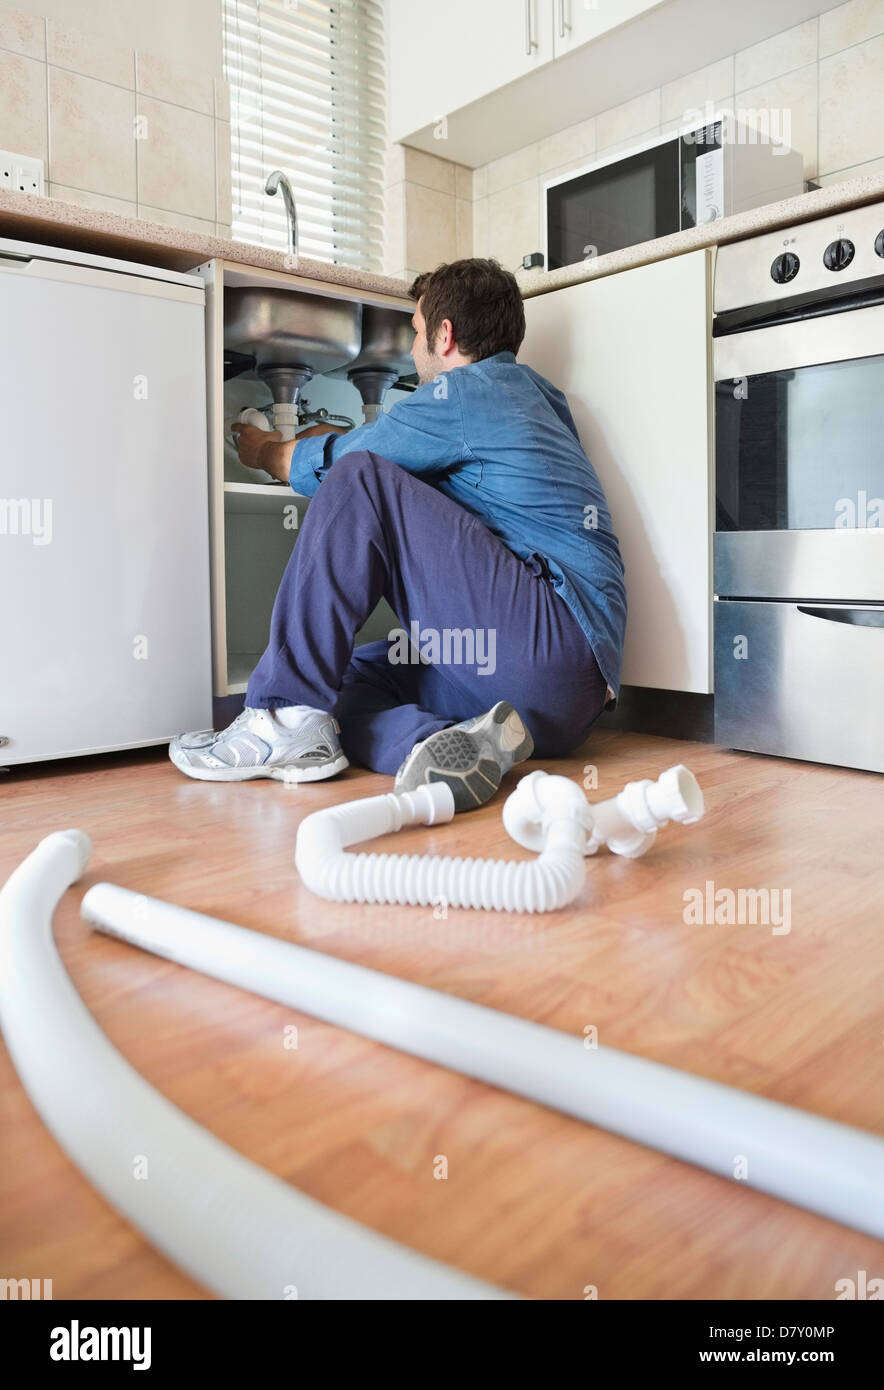 Plumber working on pipes under sink Stock Photo